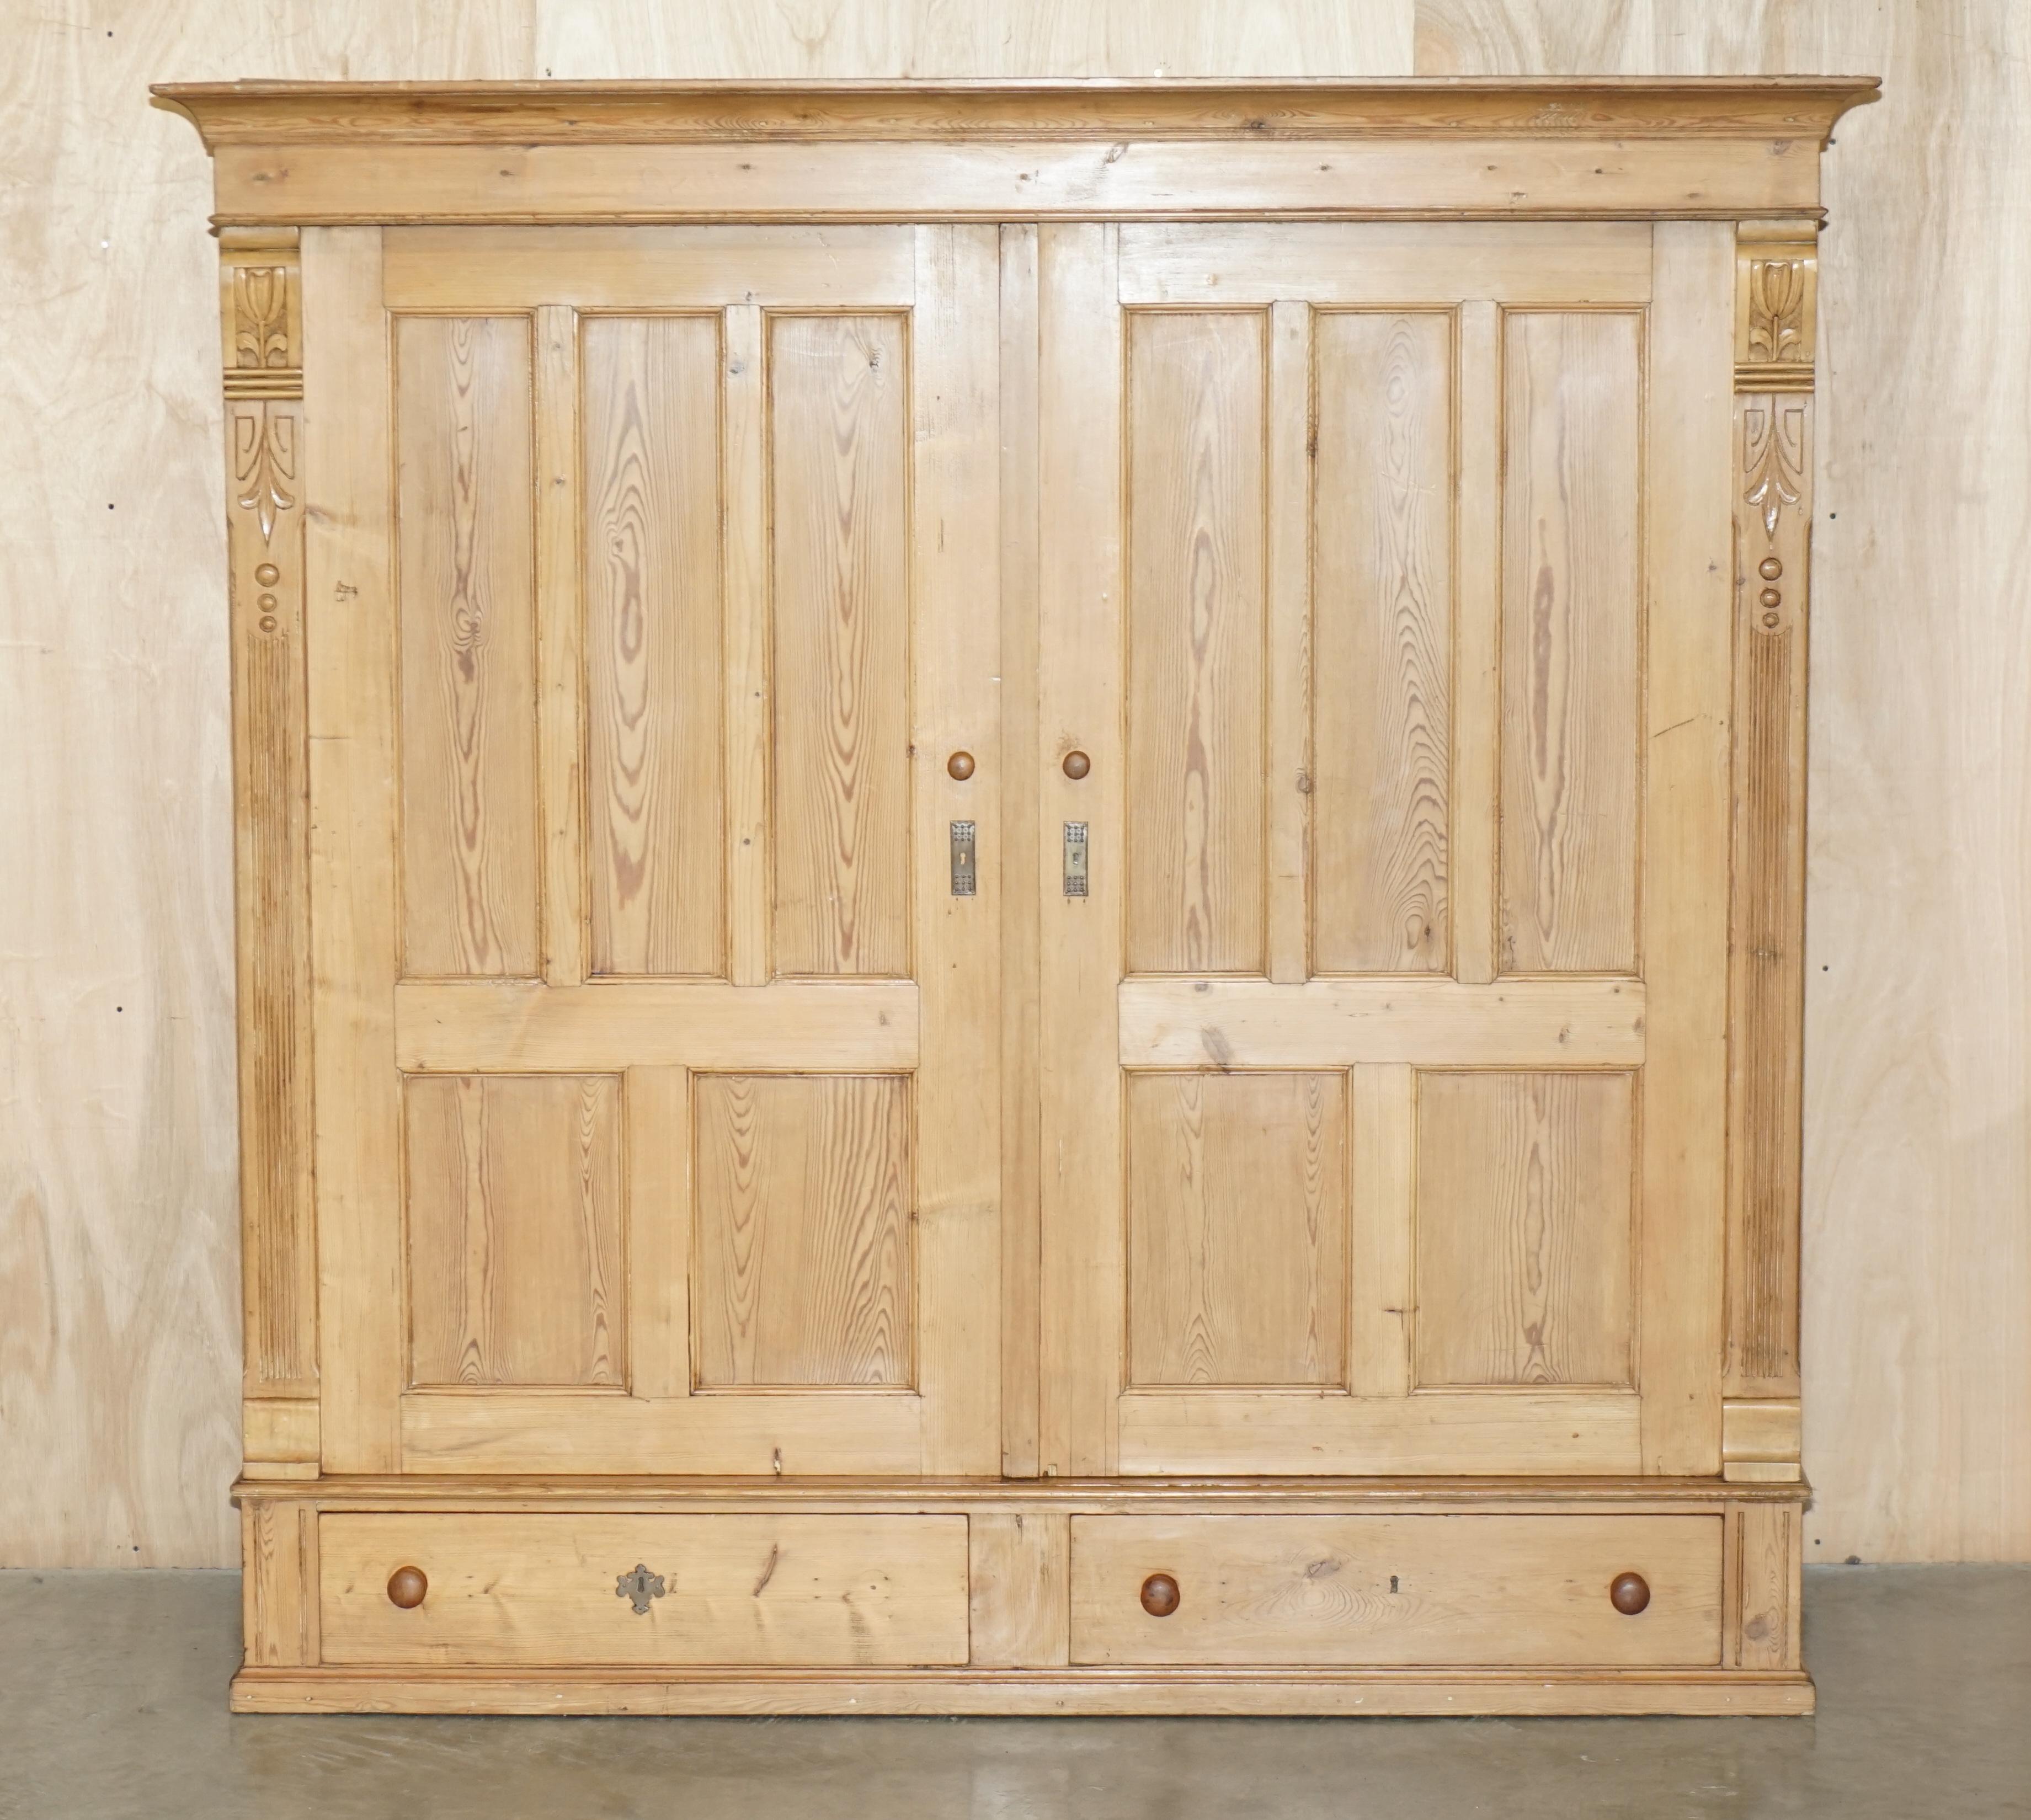 Royal House Antiques

Royal House Antiques is delighted to offer for sale this stunning, extra large, Vintage Swedish Pine hand carved wardrobe offering massive amounts of storage space 

Please note the delivery fee listed is just a guide, it